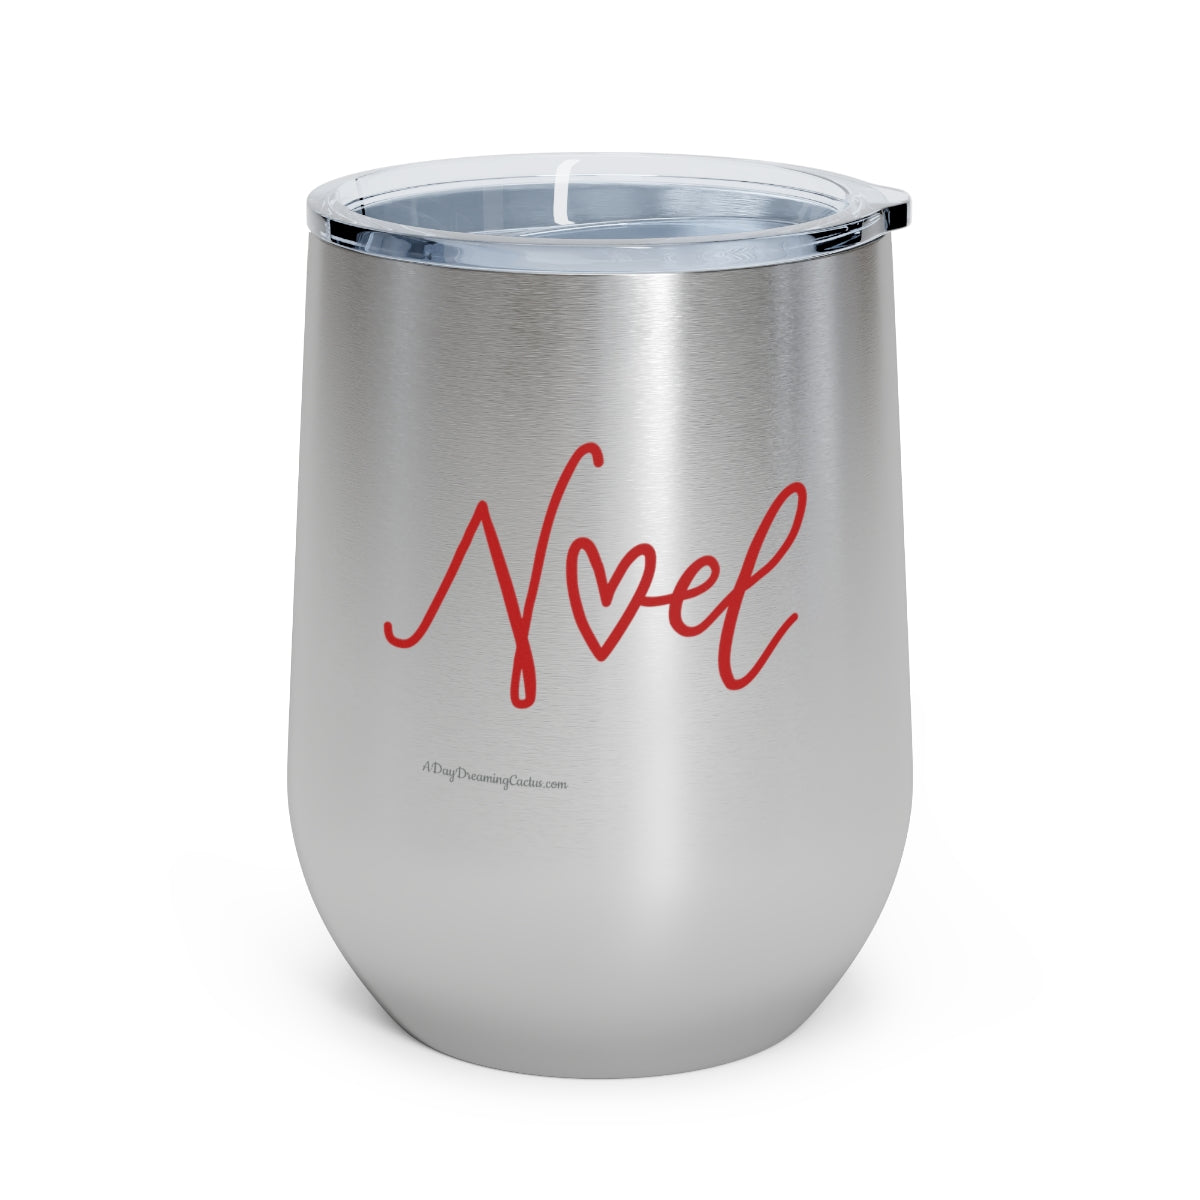 Red Noel White, Black or Silver 12oz Insulated Wine Tumbler - Cup Mug Drinkware